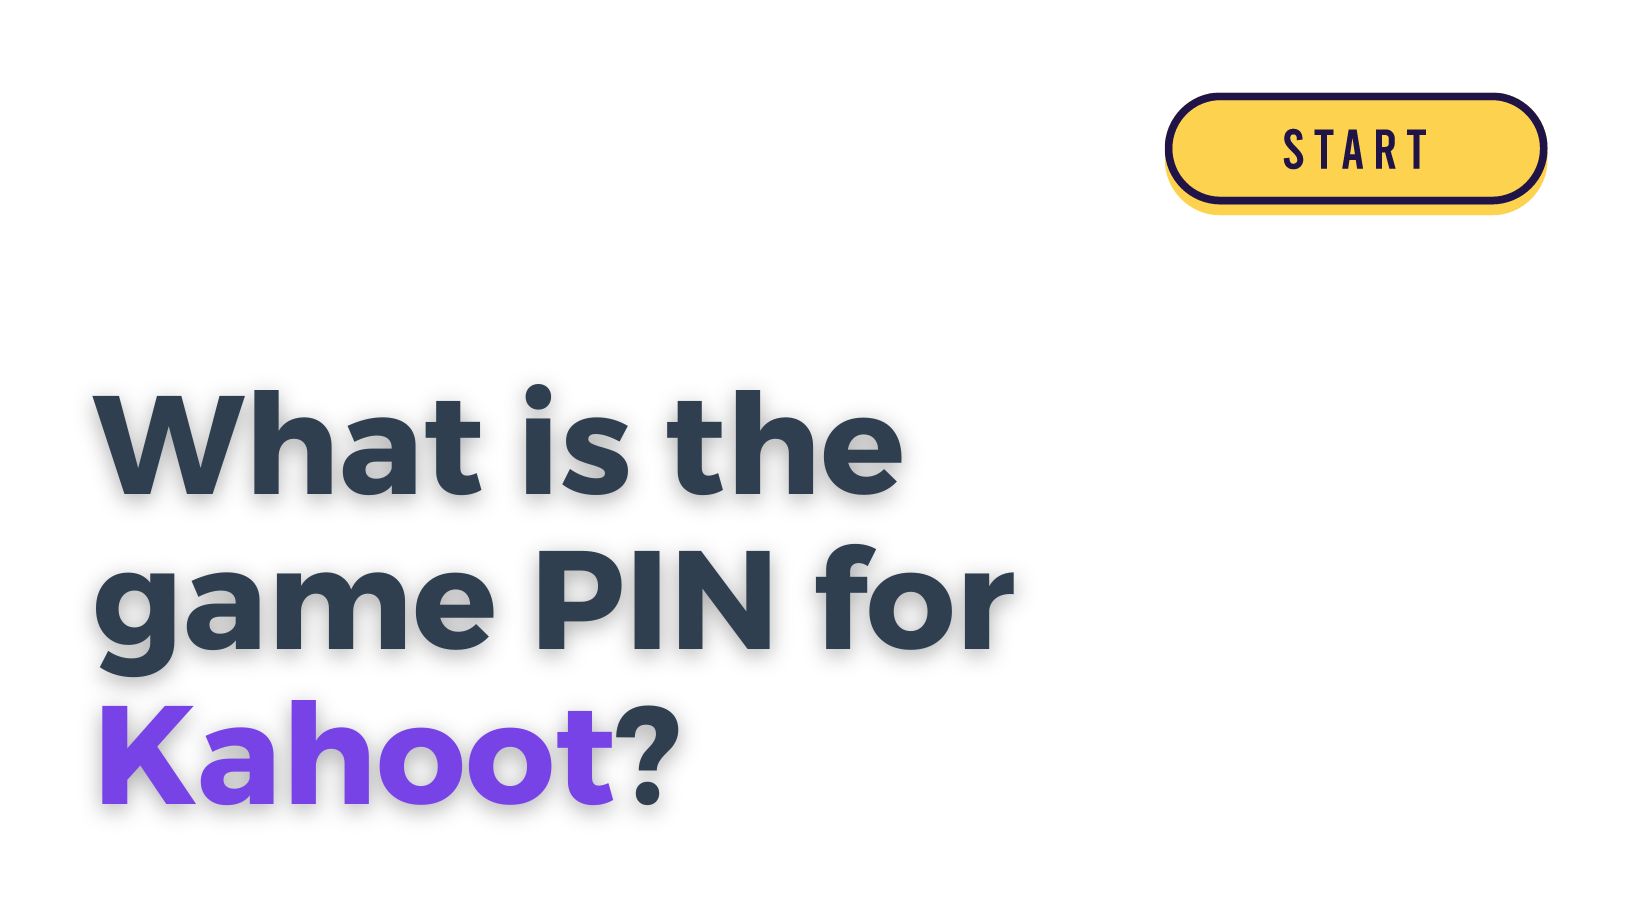 What is the game PIN for Kahoot?